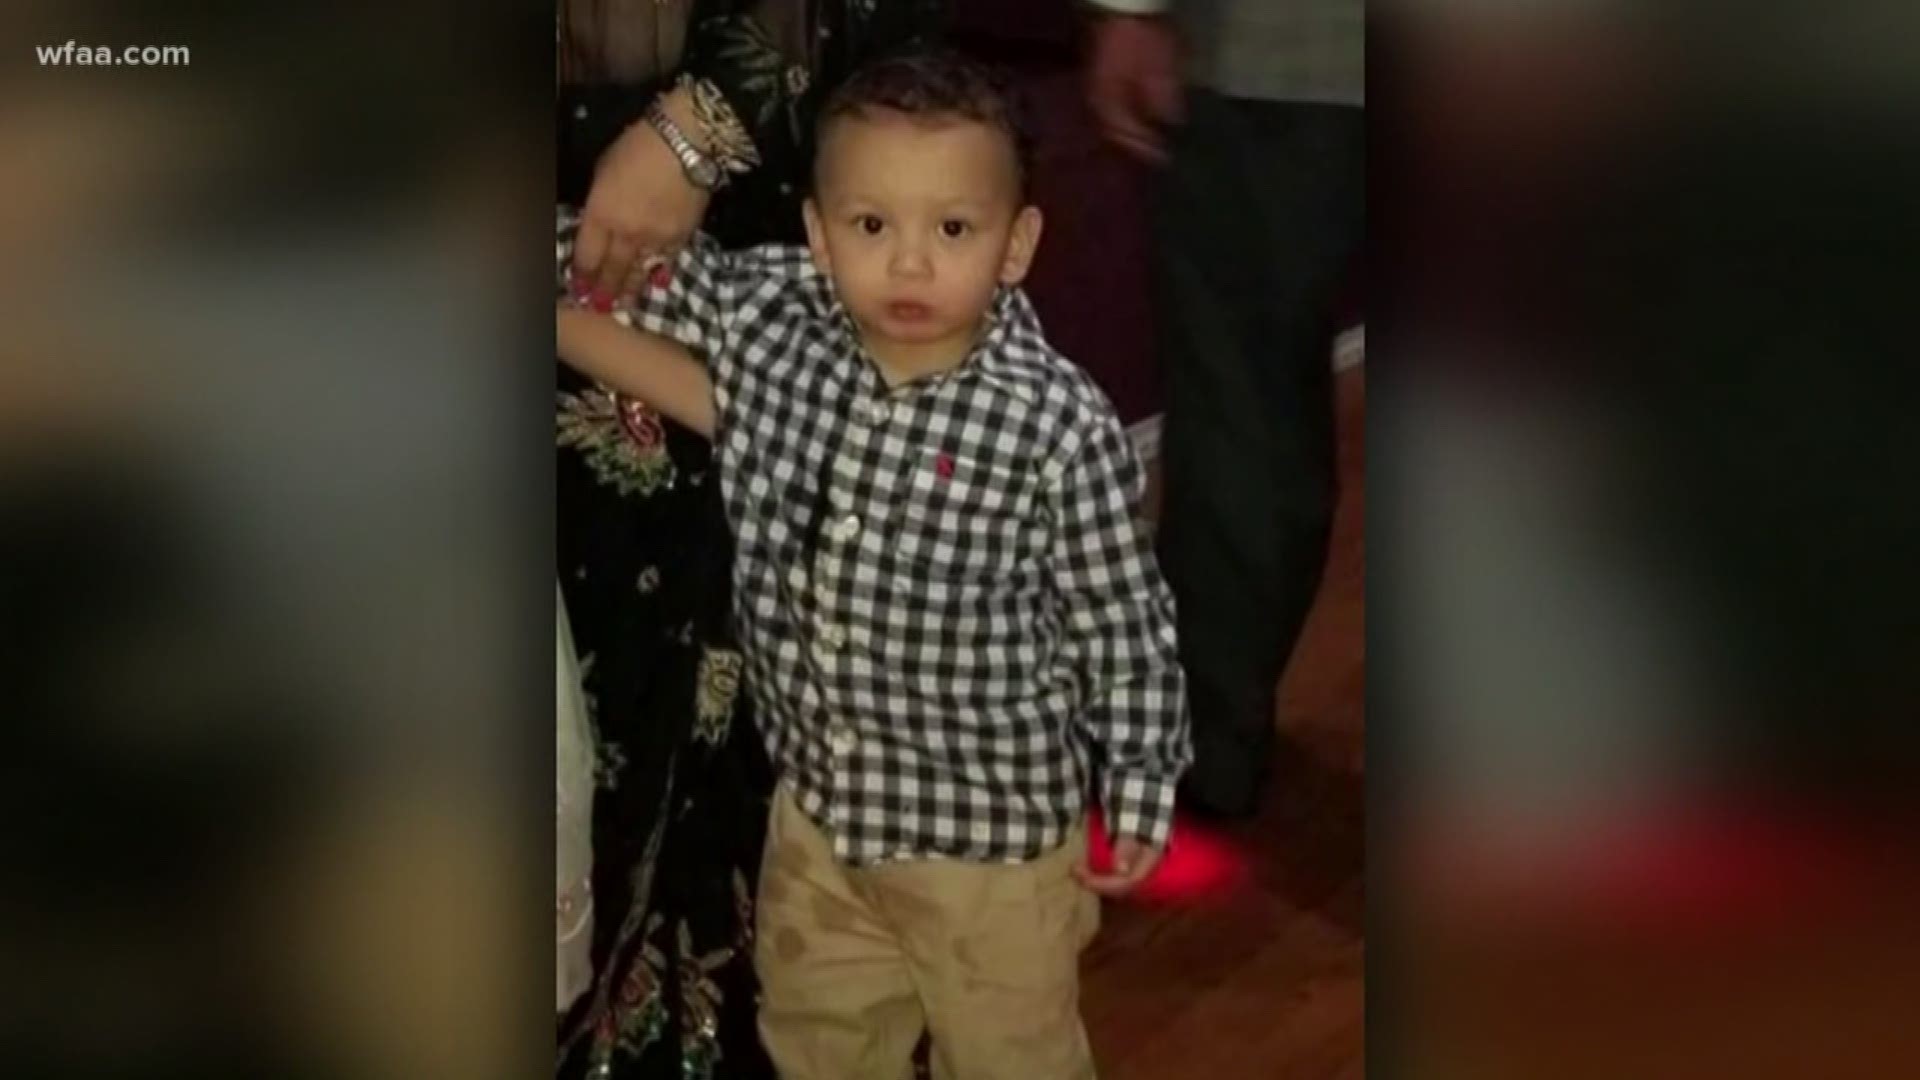 The child's body didn't have any obvious signs of trauma, according to police.